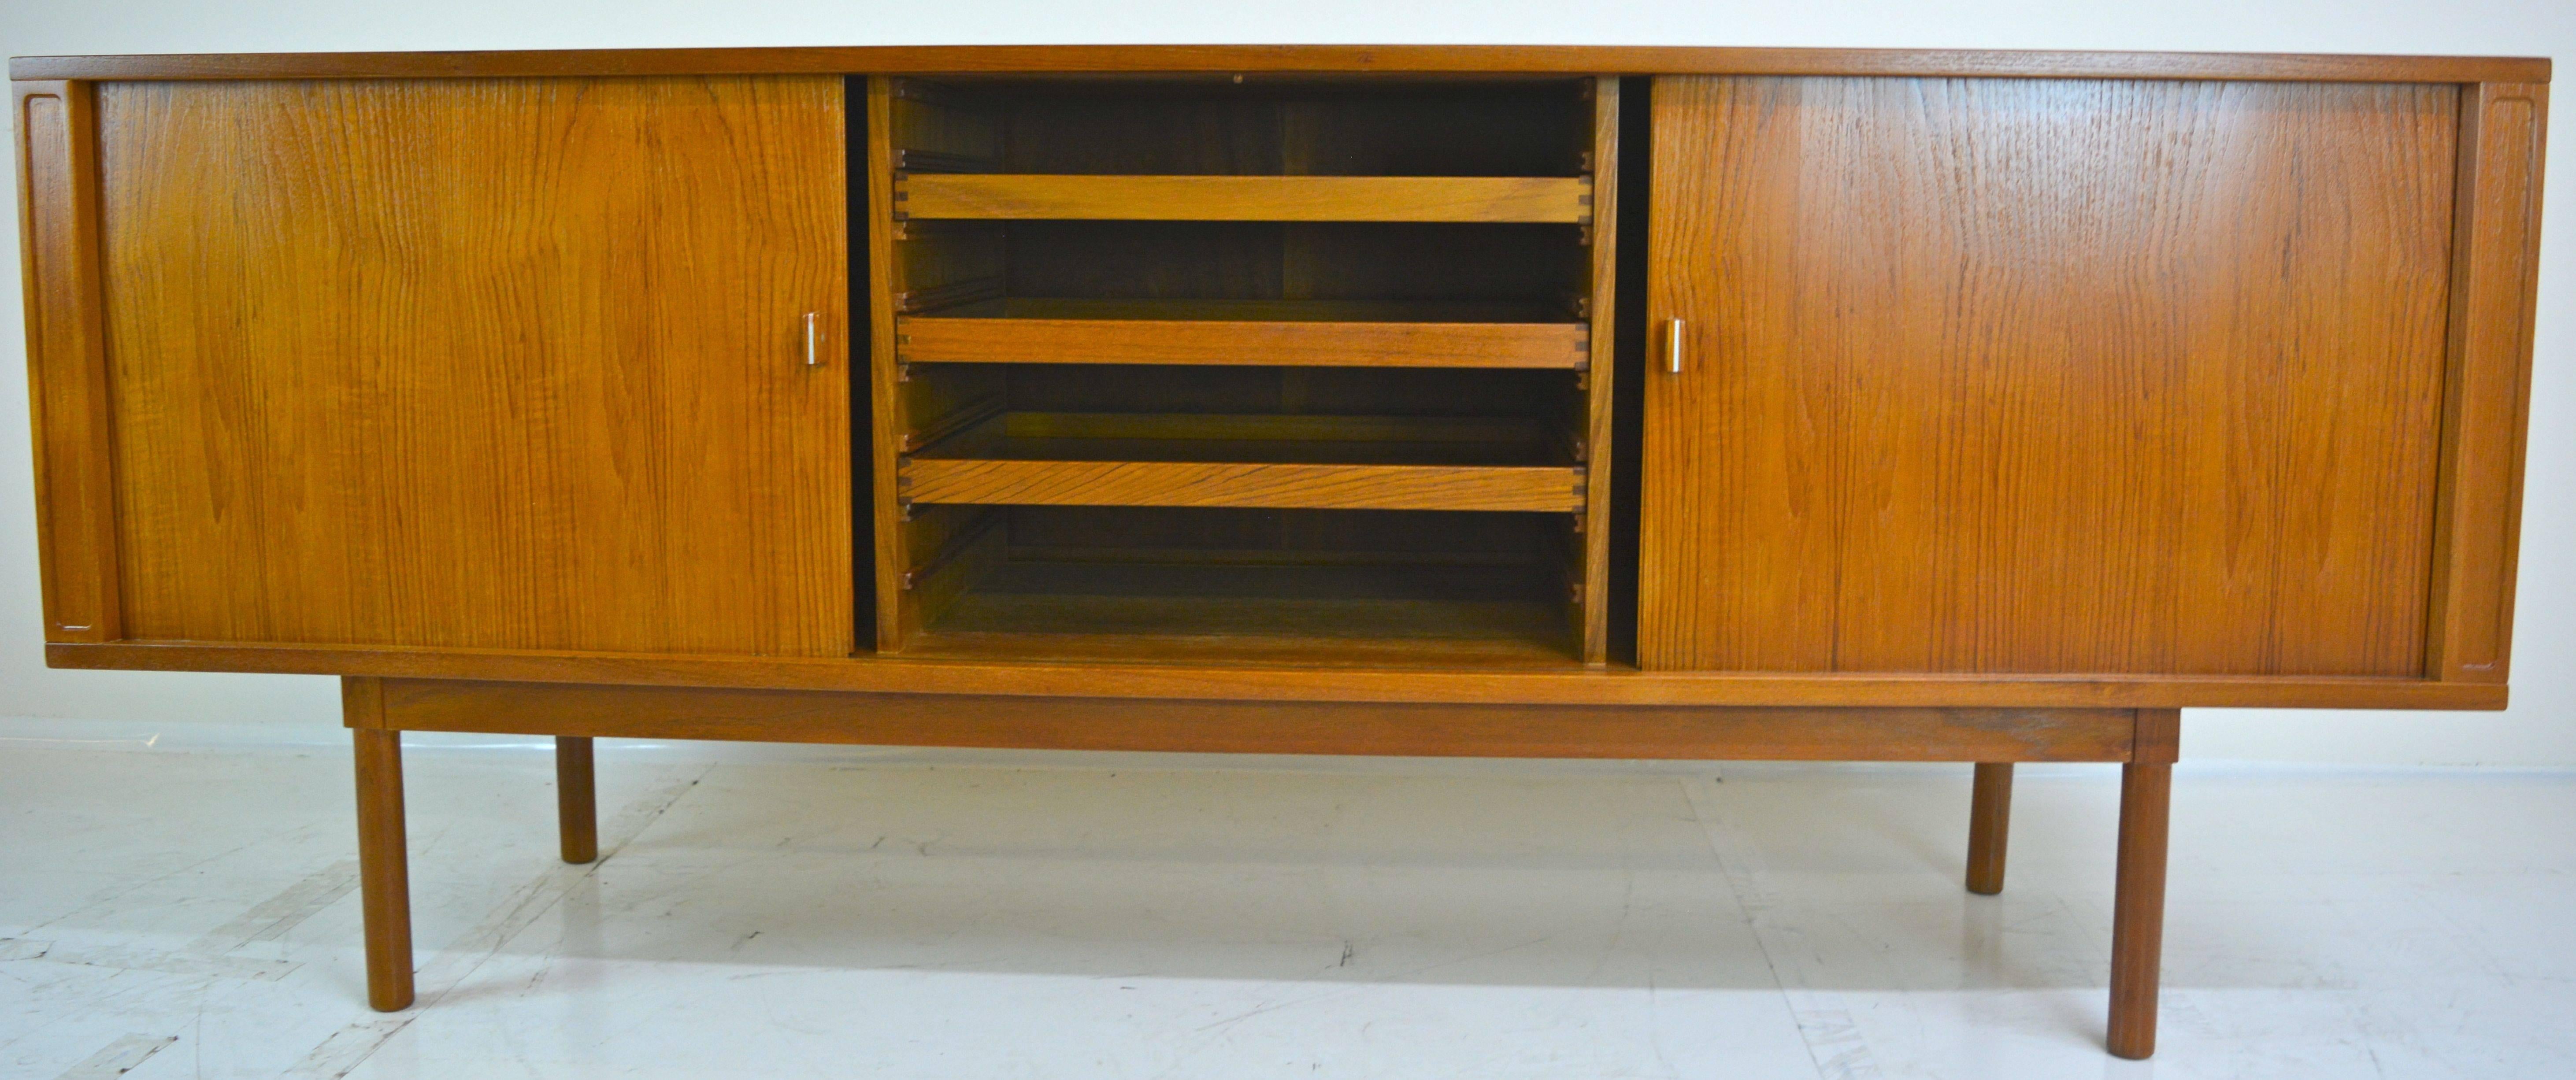 Tambour credenza in teak by Jens Herald Quistgaard for Lovig in restored condition. Excellent stainless detail to door hardware, as shown.